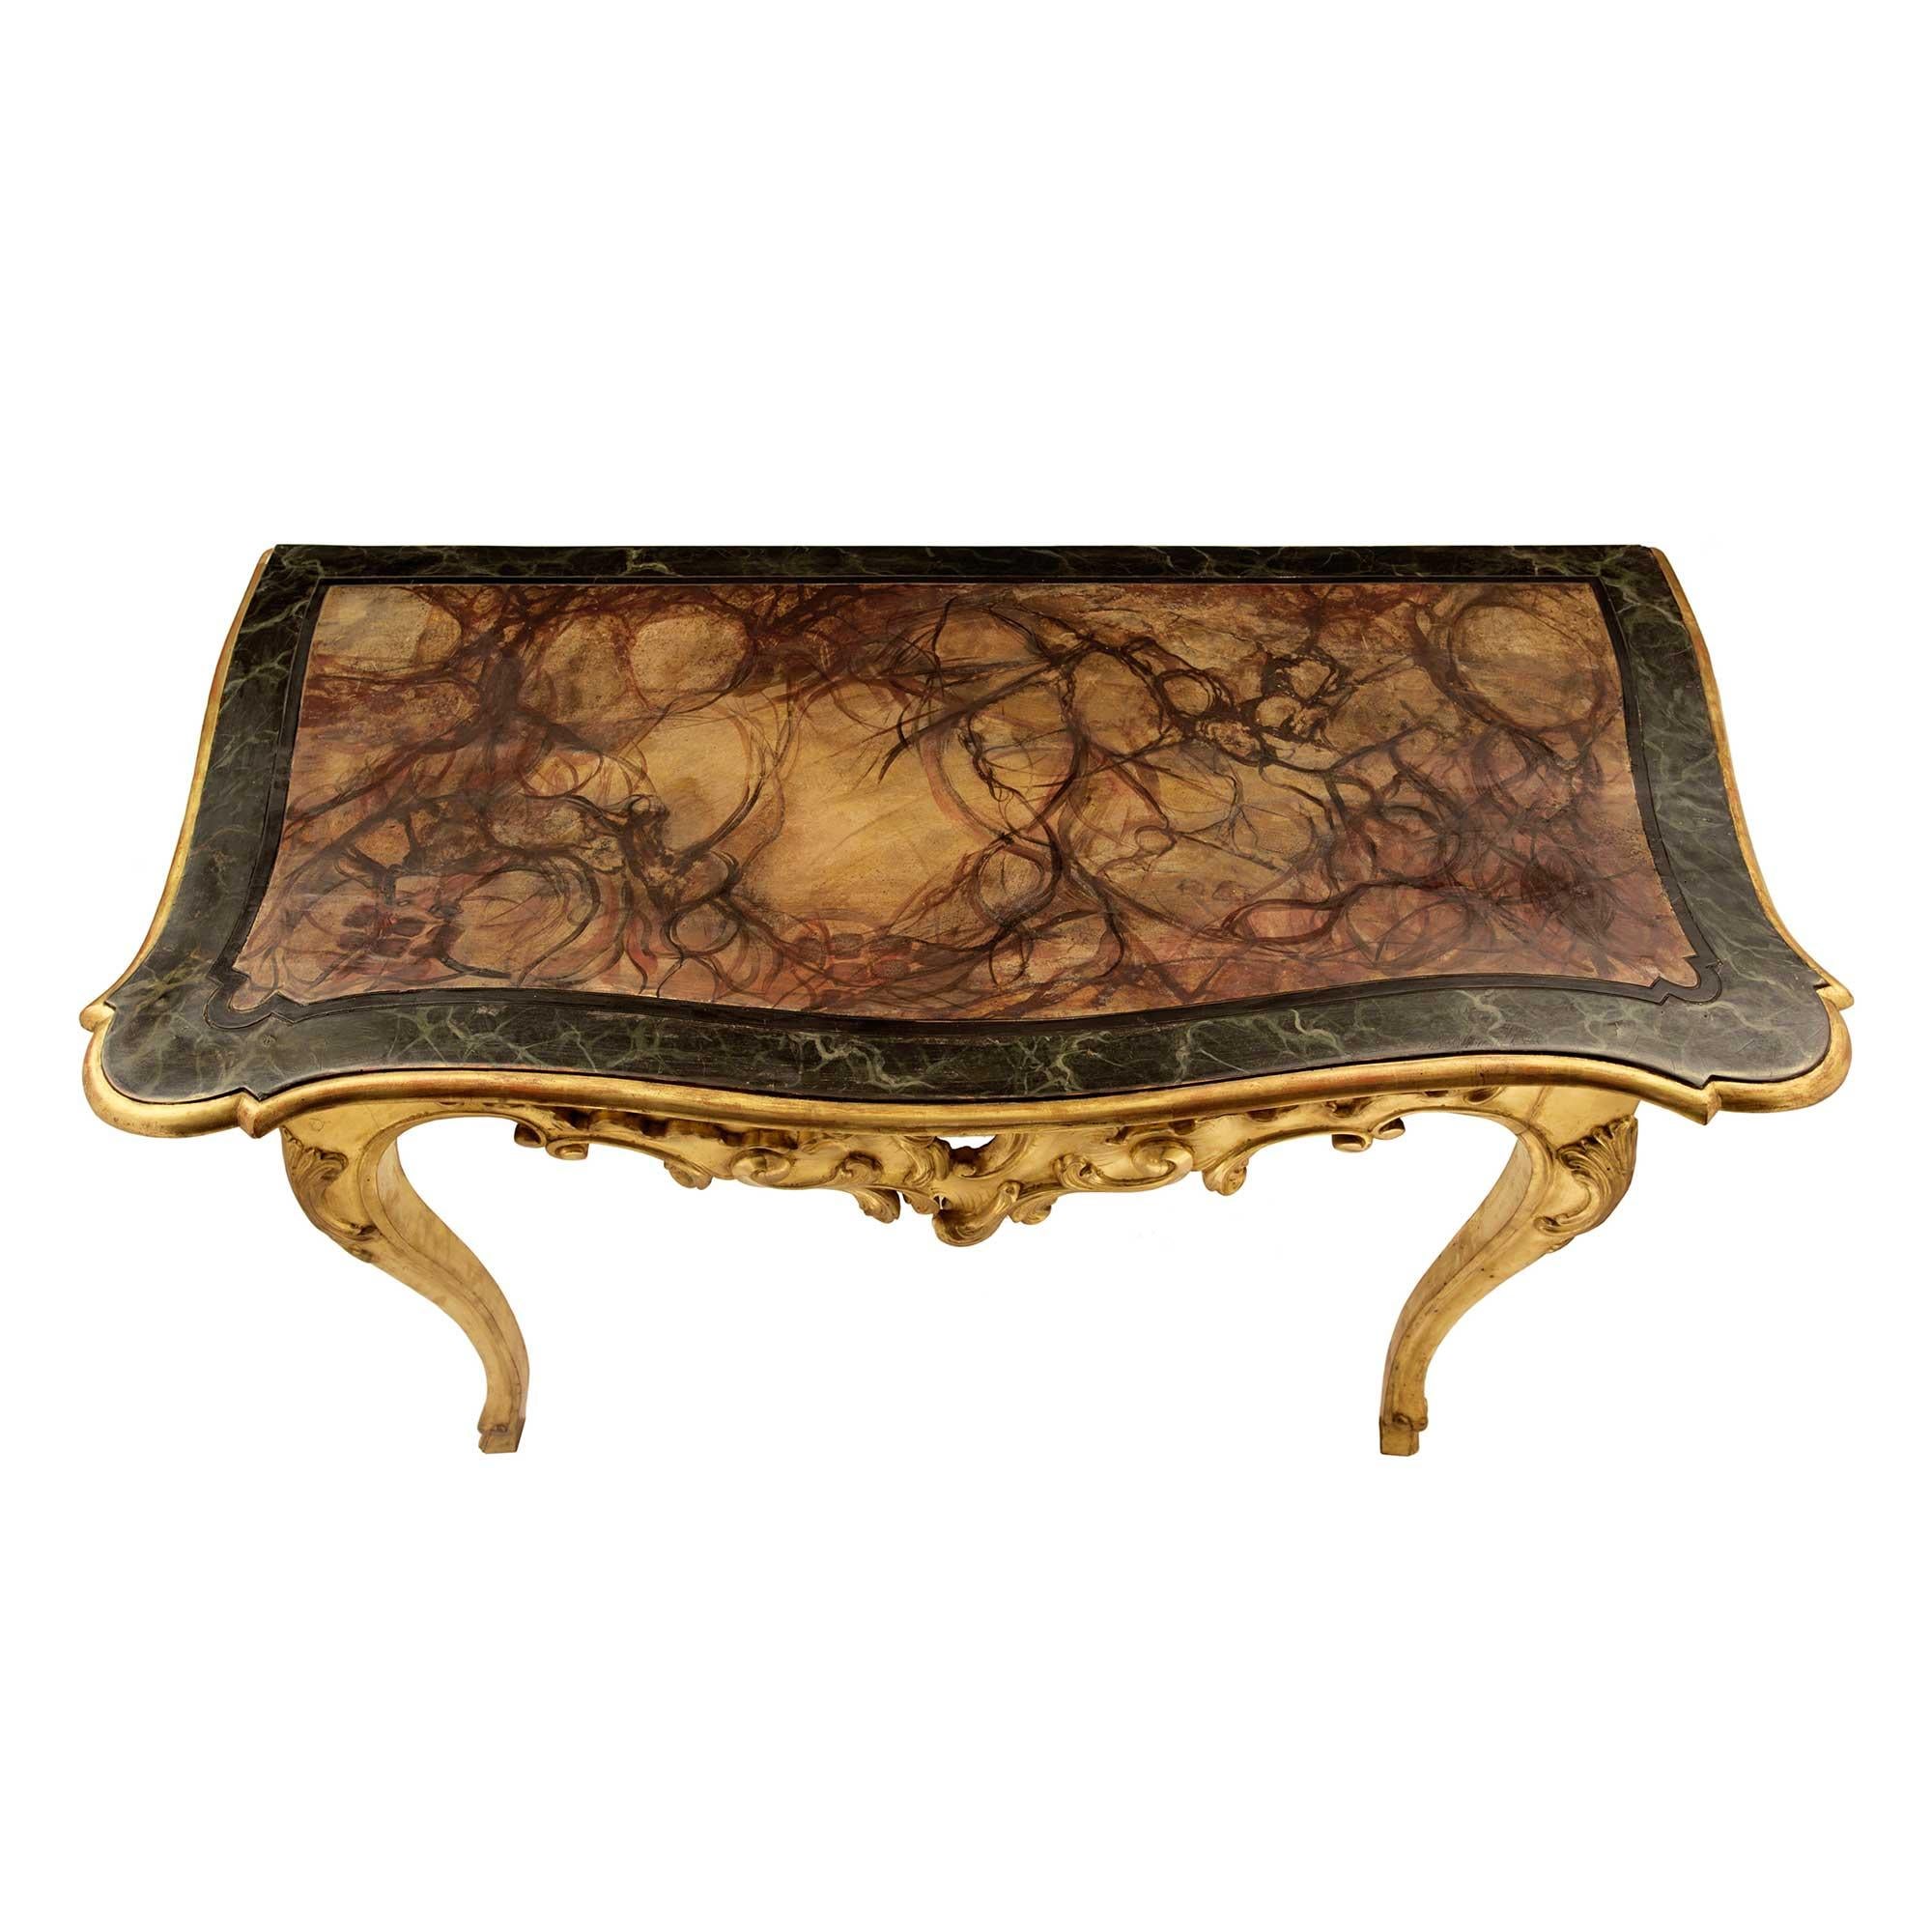 A striking pair of Italian 18th century Louis XV period giltwood and faux painted marble free standing Genovese consoles. Each beautiful console is raised by elegant cabriole legs with hoof feet and lovely foliate carved corner reserves. The lovely